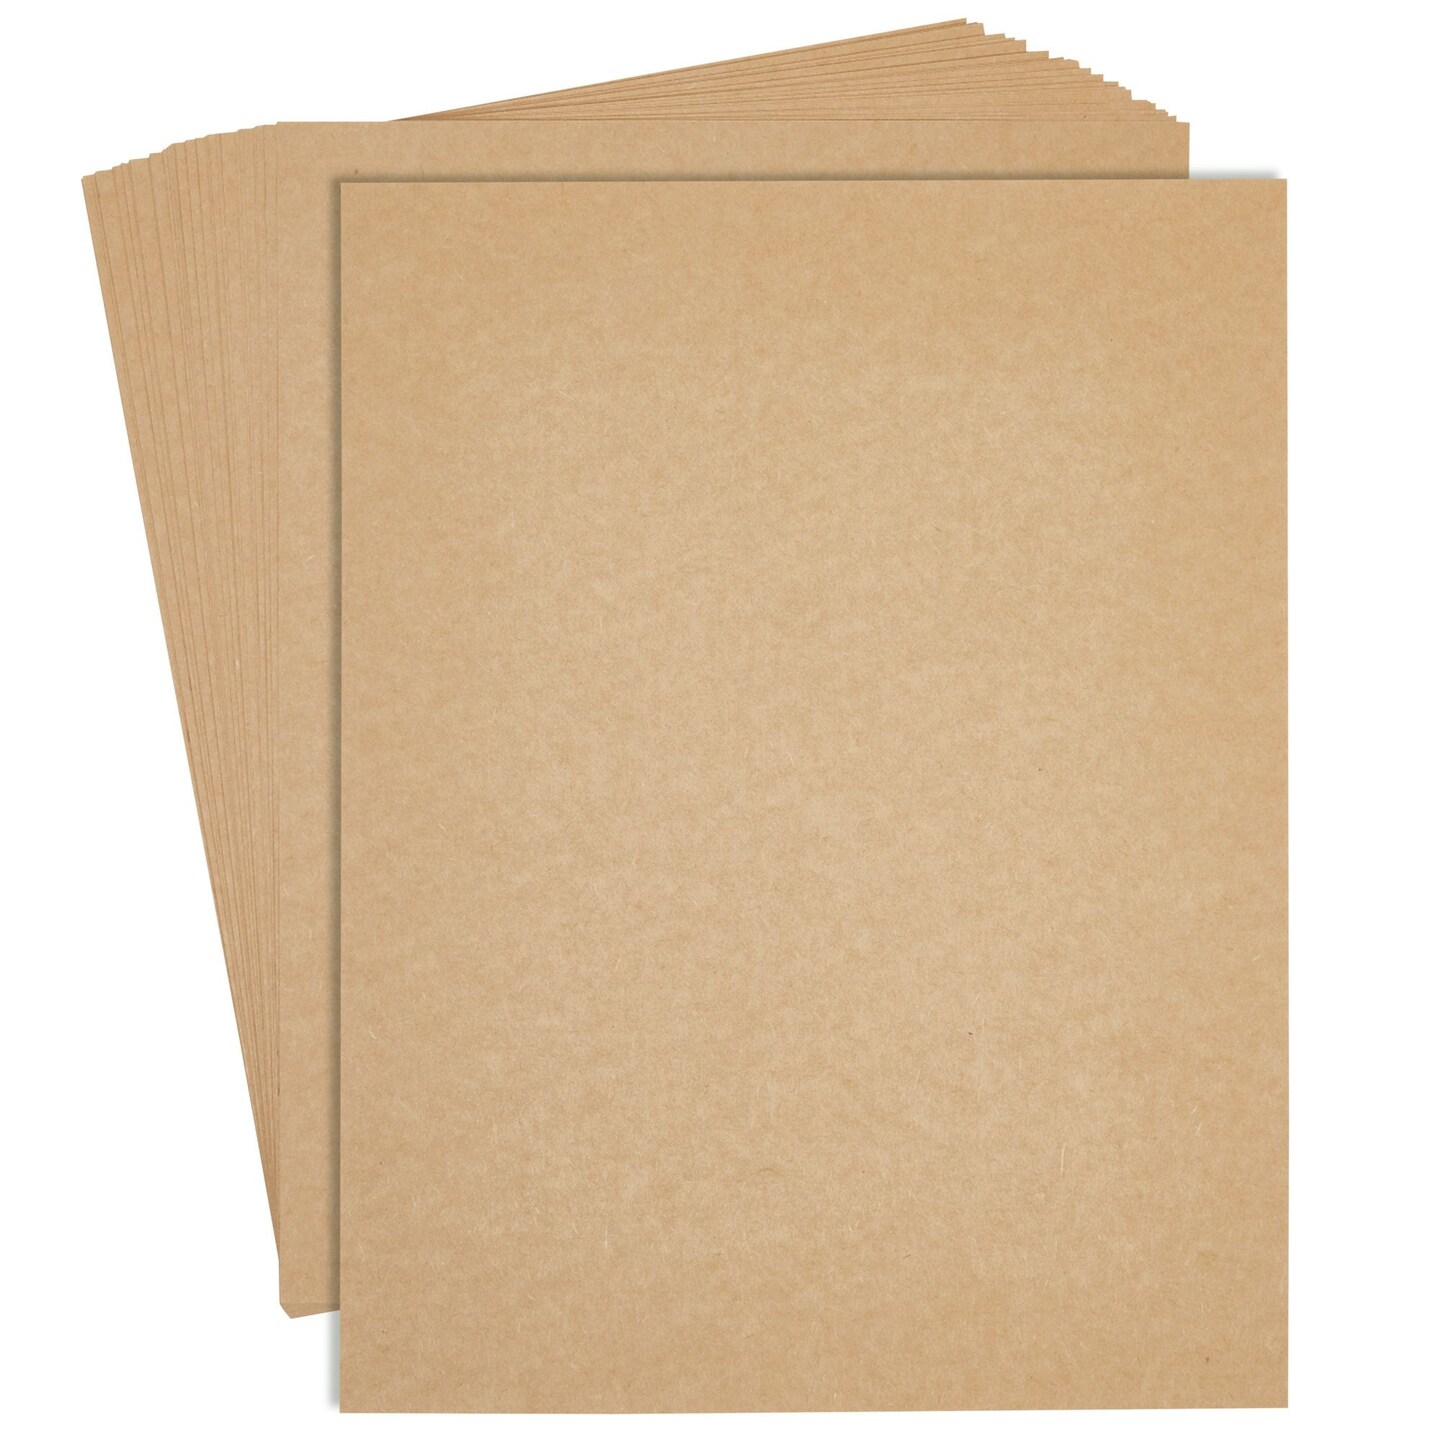 48 Sheets Brown Kraft Paper Material for Crafts, Party Invitations,  Wedding, Letter Size (120 gsm, 8.5 x 11 In)